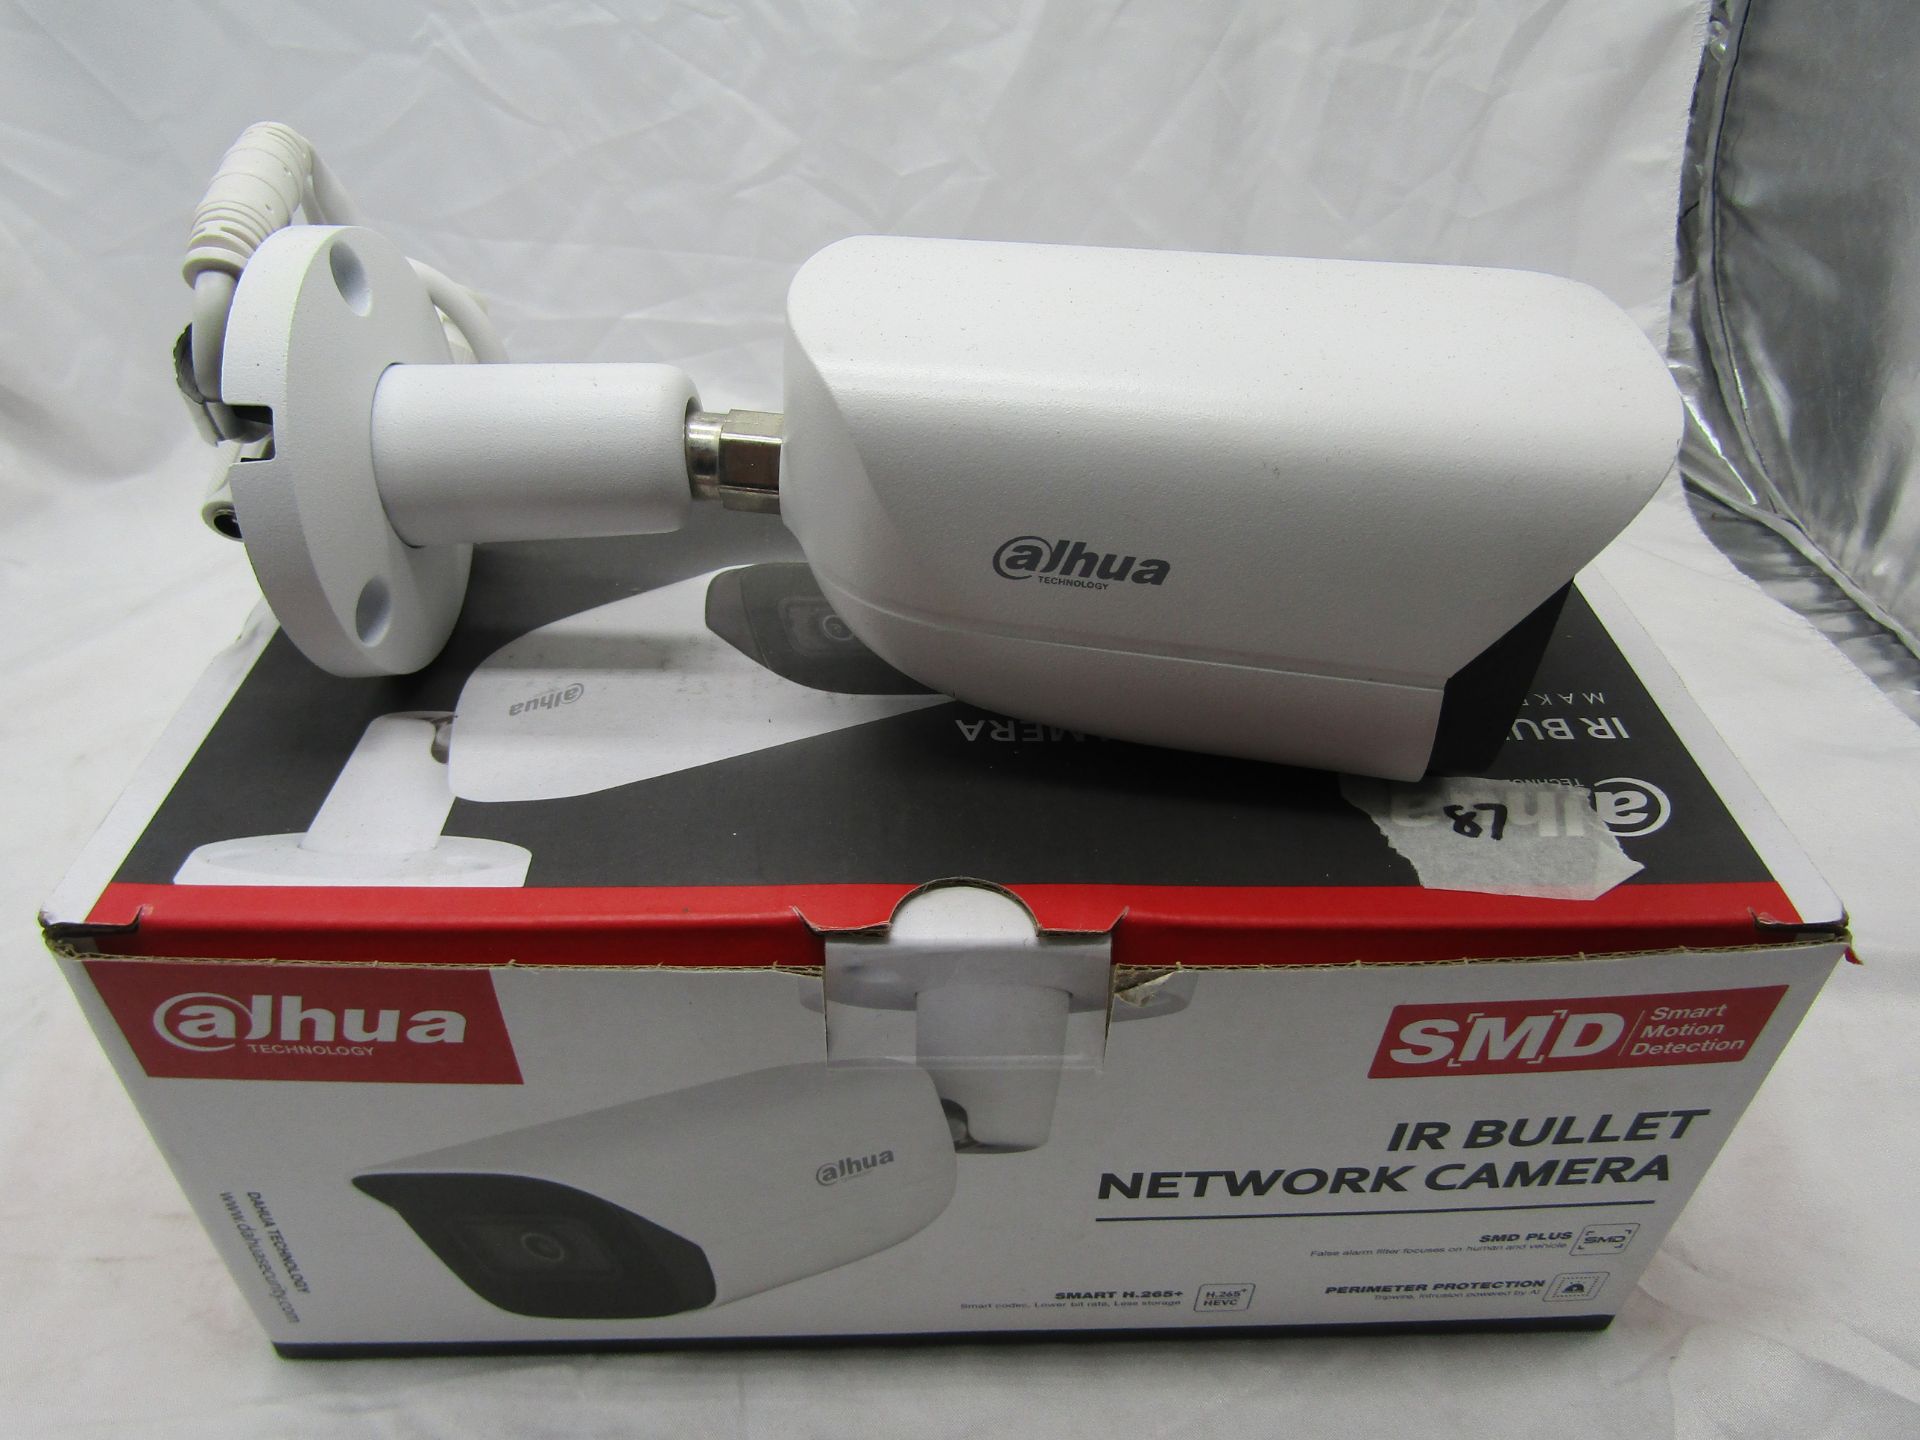 one lot of over 200 items of CCTV and Surveillance equipment, includes DVRs, Cameras, Thermal - Bild 31 aus 104